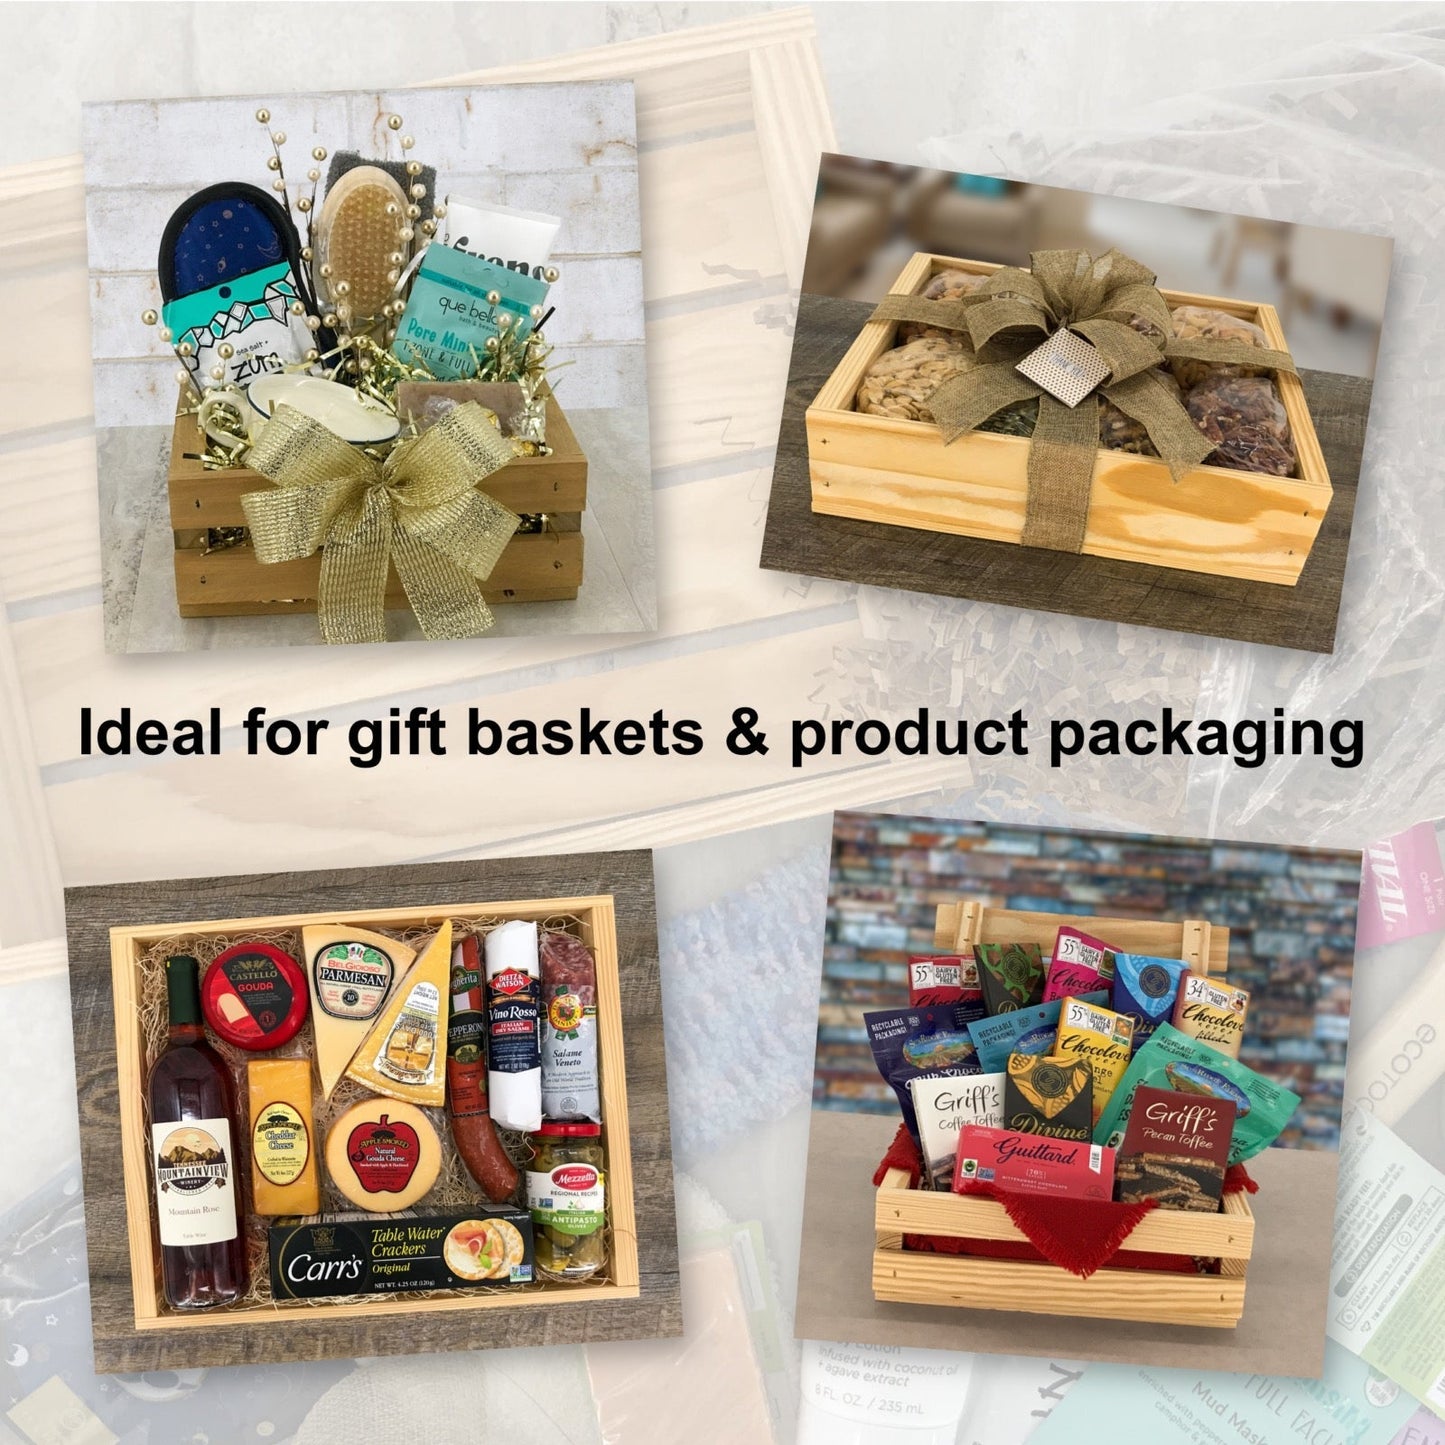 Ideal for gift baskets and product packaging, S2-14.375-11.875-3.5-ST-NW-NL, 6-S2-14.375-11.875-3.5-ST-NW-NL, 12-S2-14.375-11.875-3.5-ST-NW-NL, 24-S2-14.375-11.875-3.5-ST-NW-NL, 48-S2-14.375-11.875-3.5-ST-NW-NL, 96-S2-14.375-11.875-3.5-ST-NW-NL